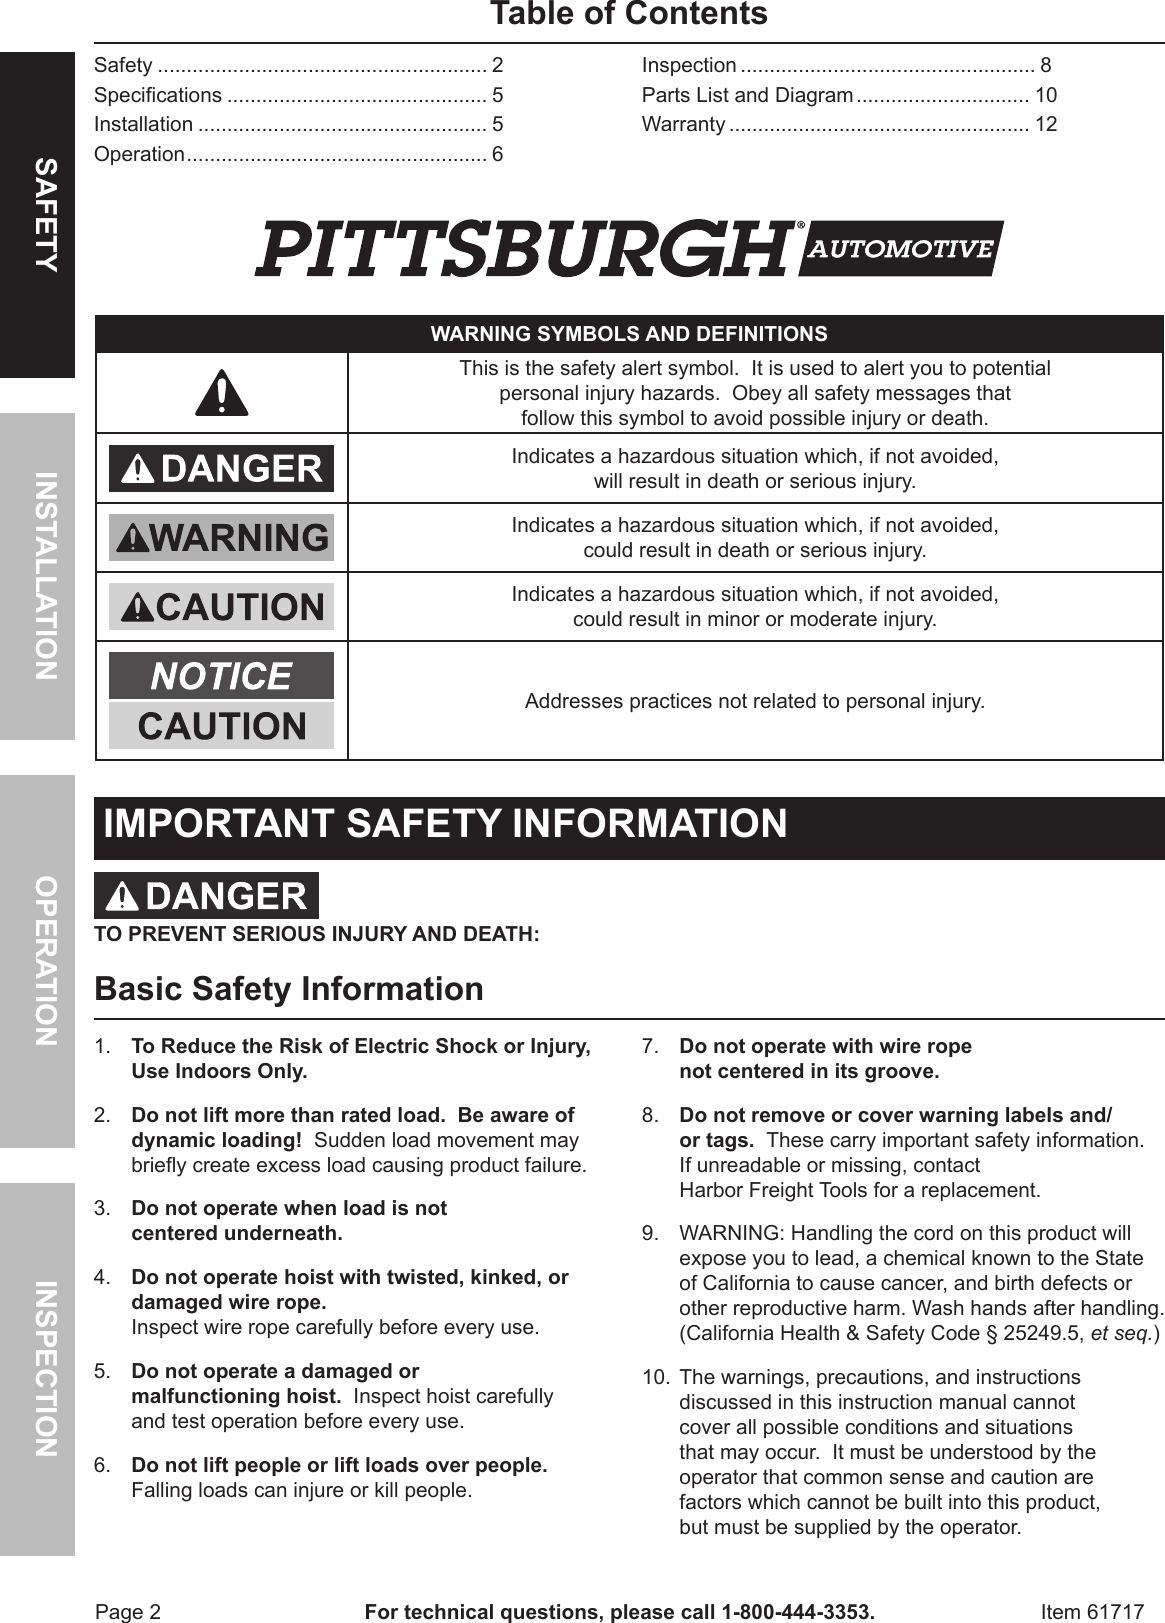 Page 2 of 12 - Harbor-Freight Harbor-Freight-2000-Lb-Electric-Hoist-With-Remote-Control-Product-Manual-  Harbor-freight-2000-lb-electric-hoist-with-remote-control-product-manual